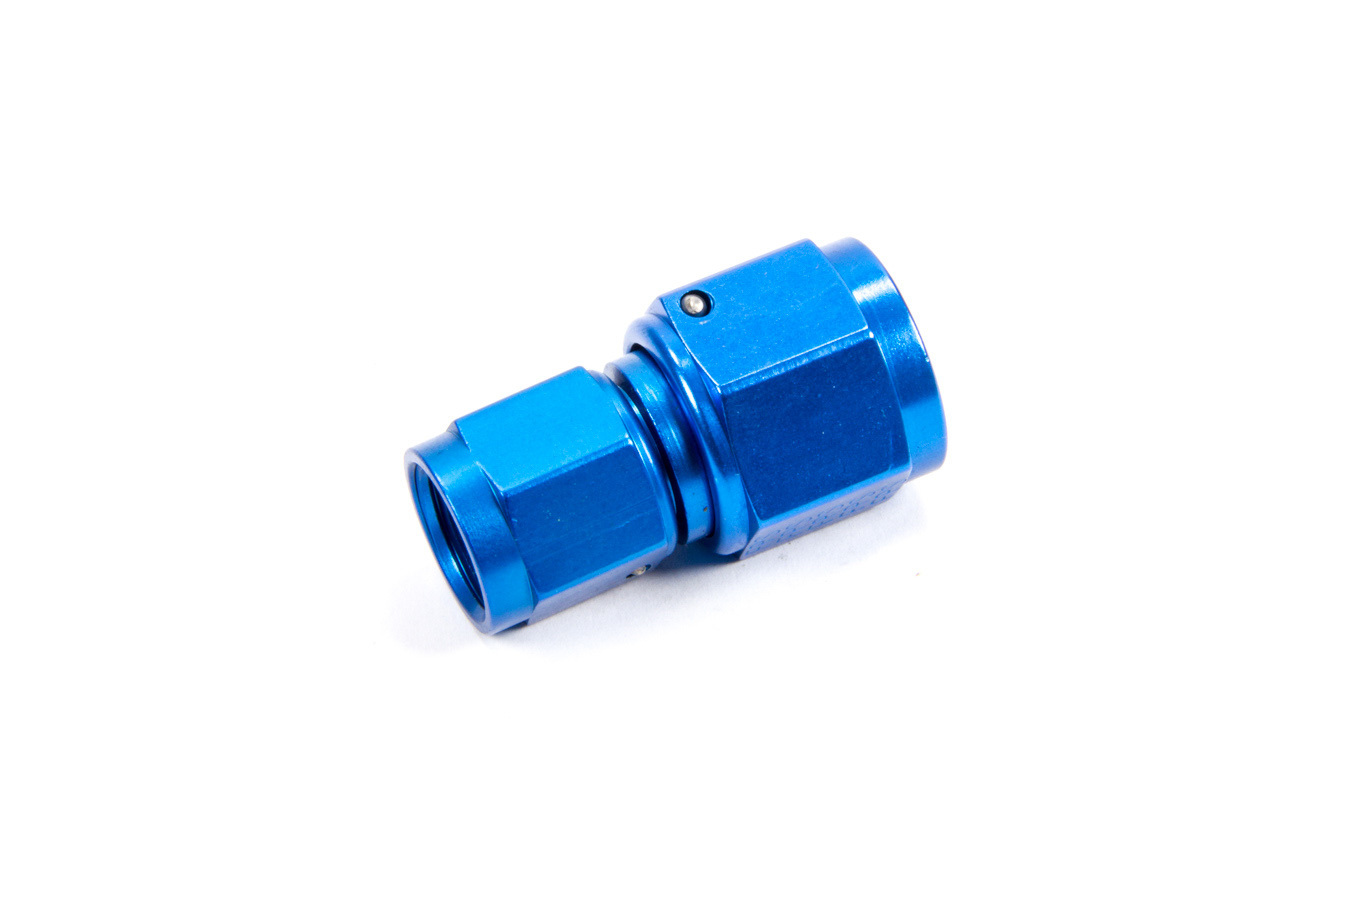 Fragola 496107 Fitting, Adapter, Straight, 6 AN Female Swivel to 8 AN Female Swivel, Aluminum, Blue Anodized, Each